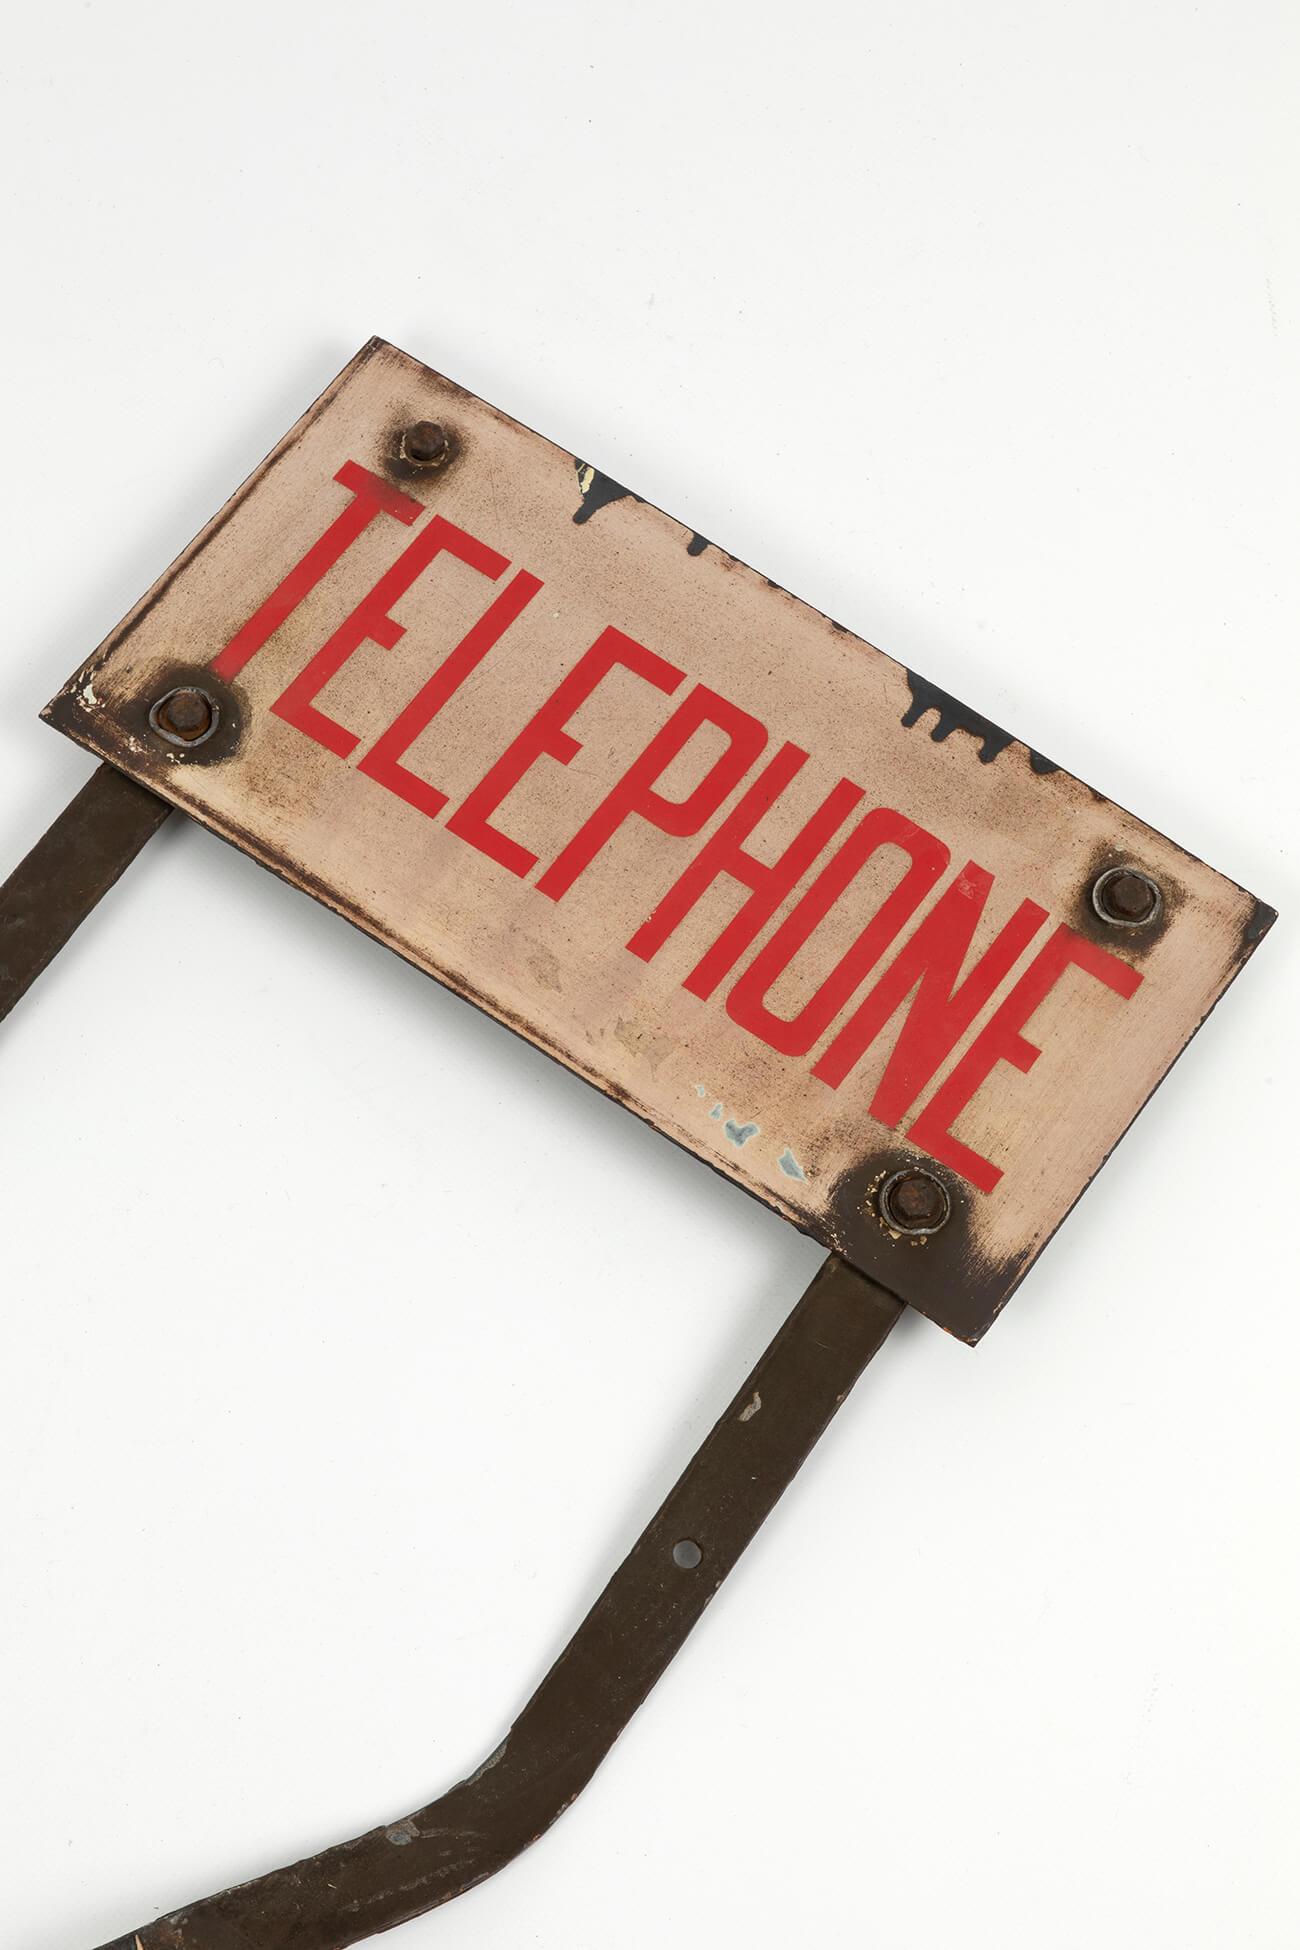 Original industrial enamel telephone sign in wonderful condition. Sitting atop its two original legs. Most likely used in a factory or possibly a mine. 
British, circa 1950s.

Additional information:
H 54 cm (H 21.2 inches)
W 41 cm (W 16.1